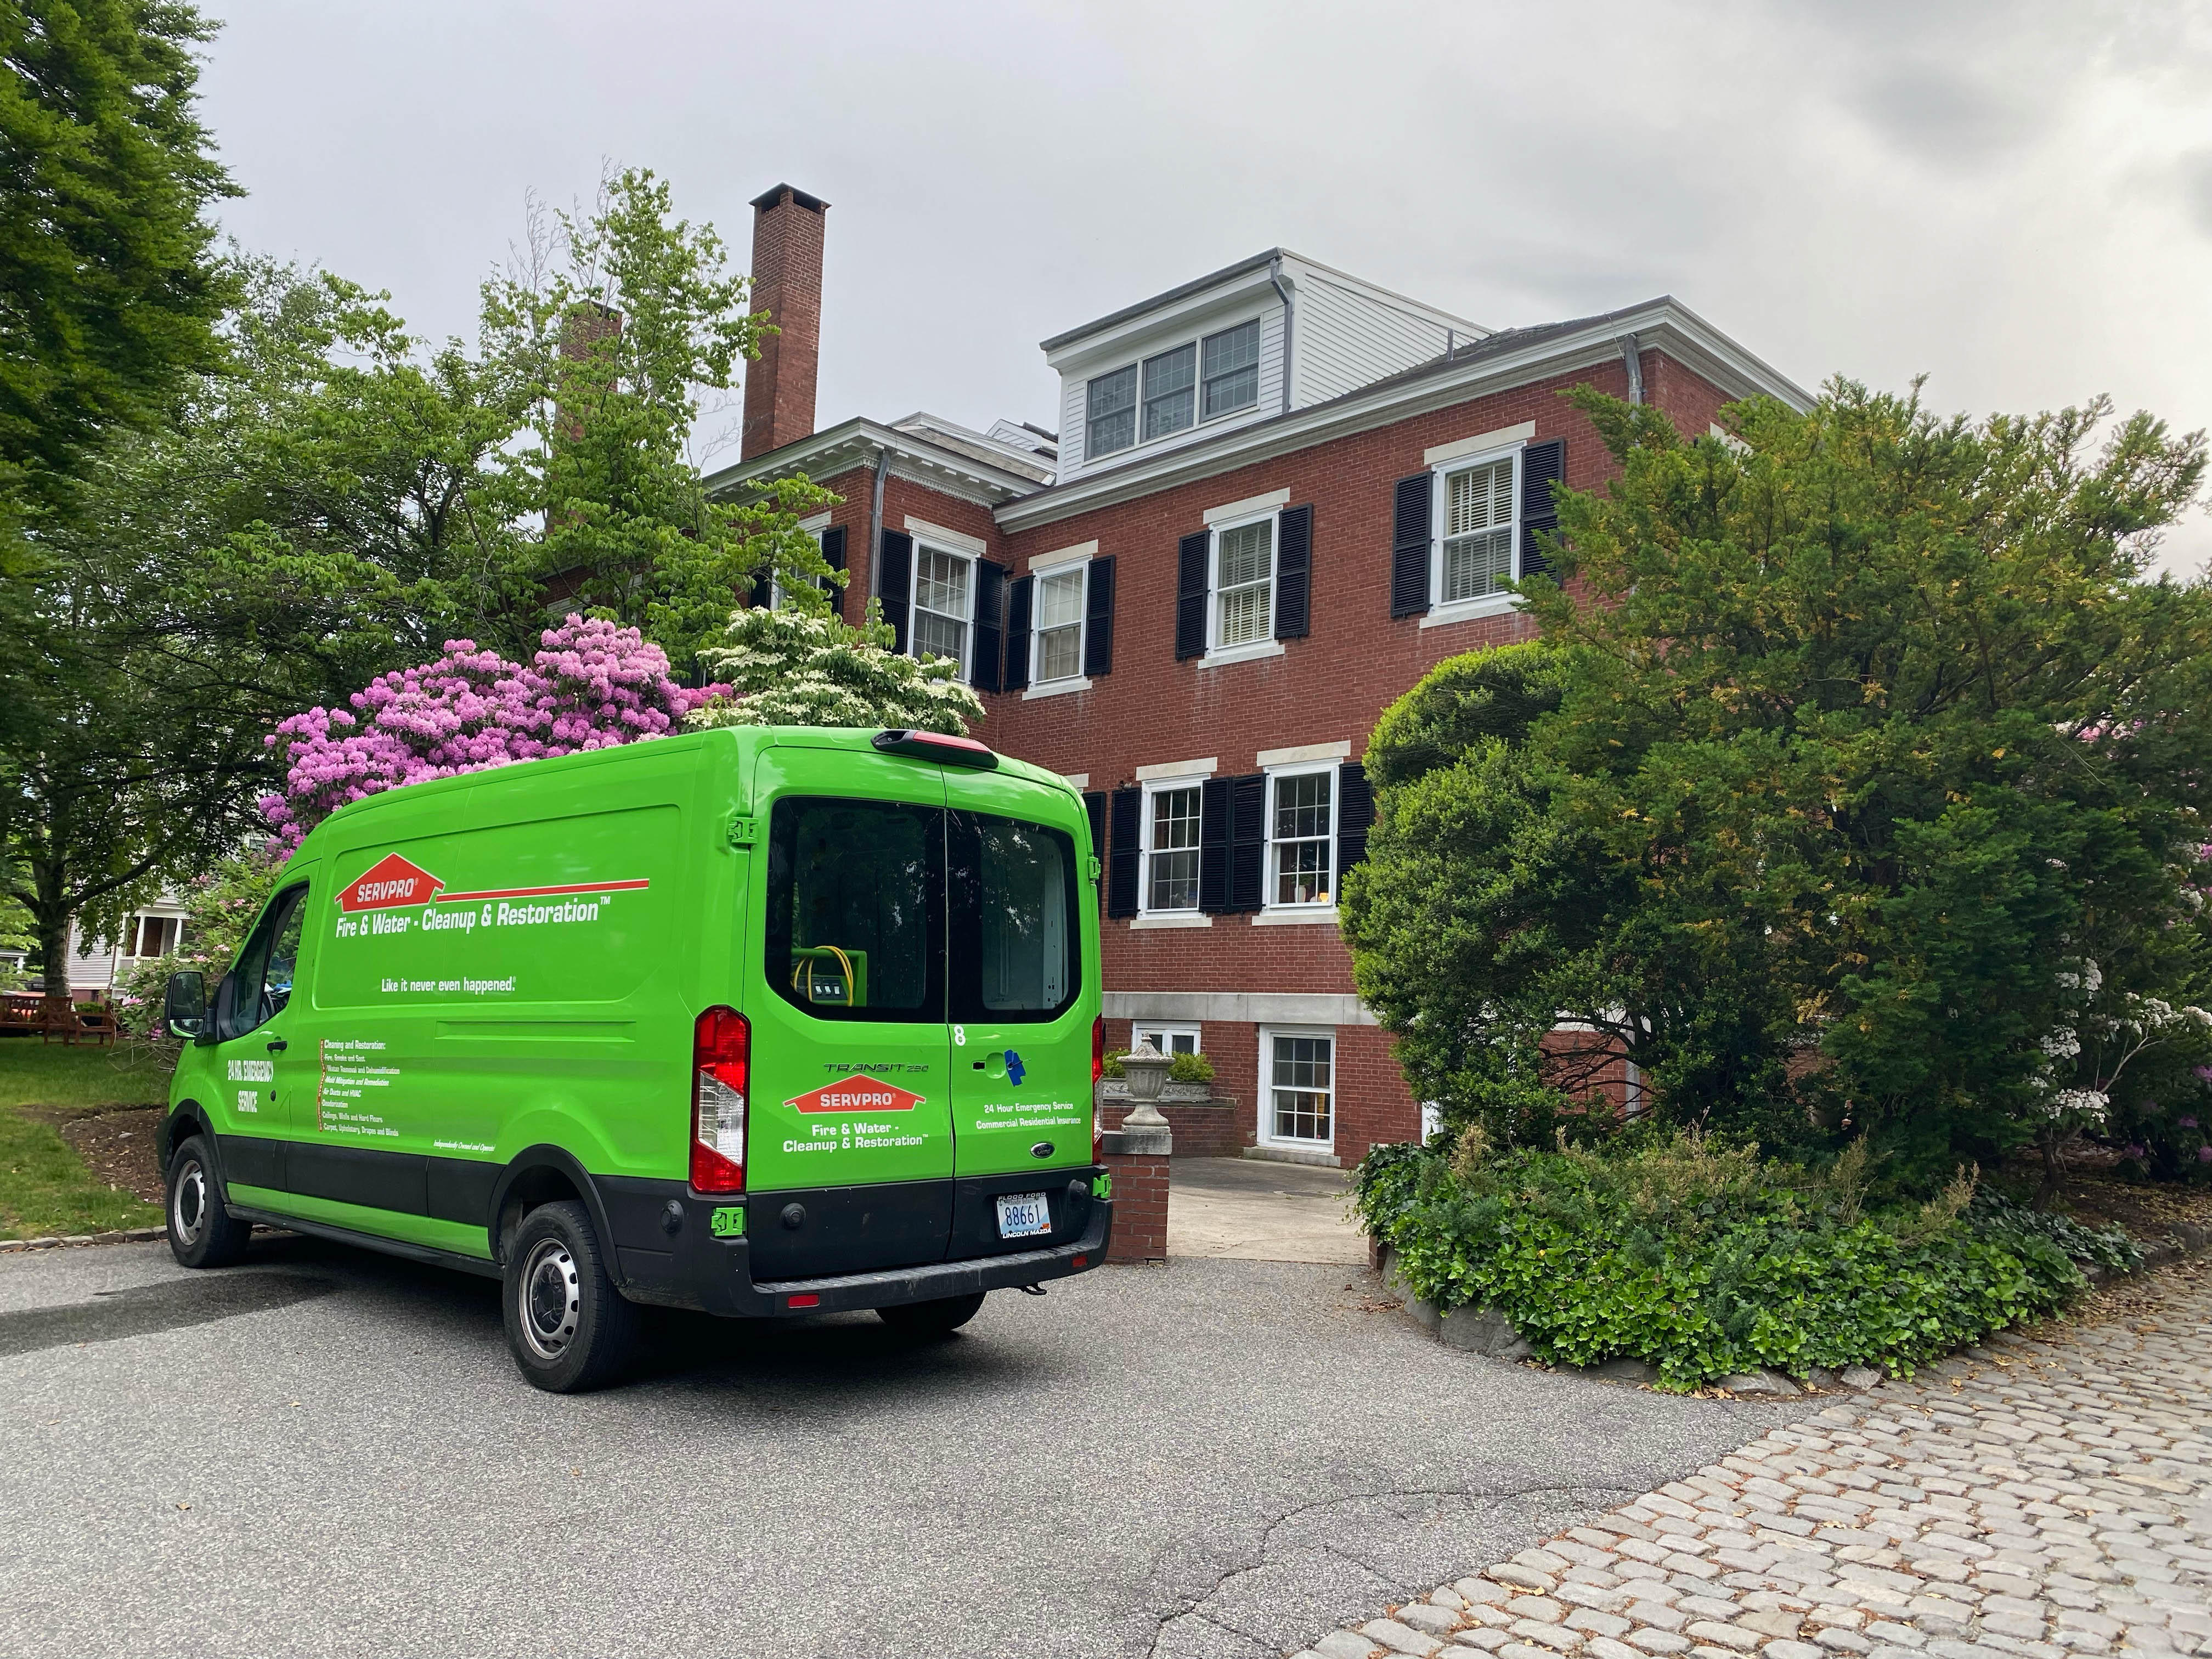 SERVPRO of Boston Downtown / Back Bay / South Boston  and SERVPRO of Dorchester  is a company that specializes in fire, mold, and water damage restoration. We have vast restoration skills and can restore your Dorchester, MA property to its original state. Please give us a call.